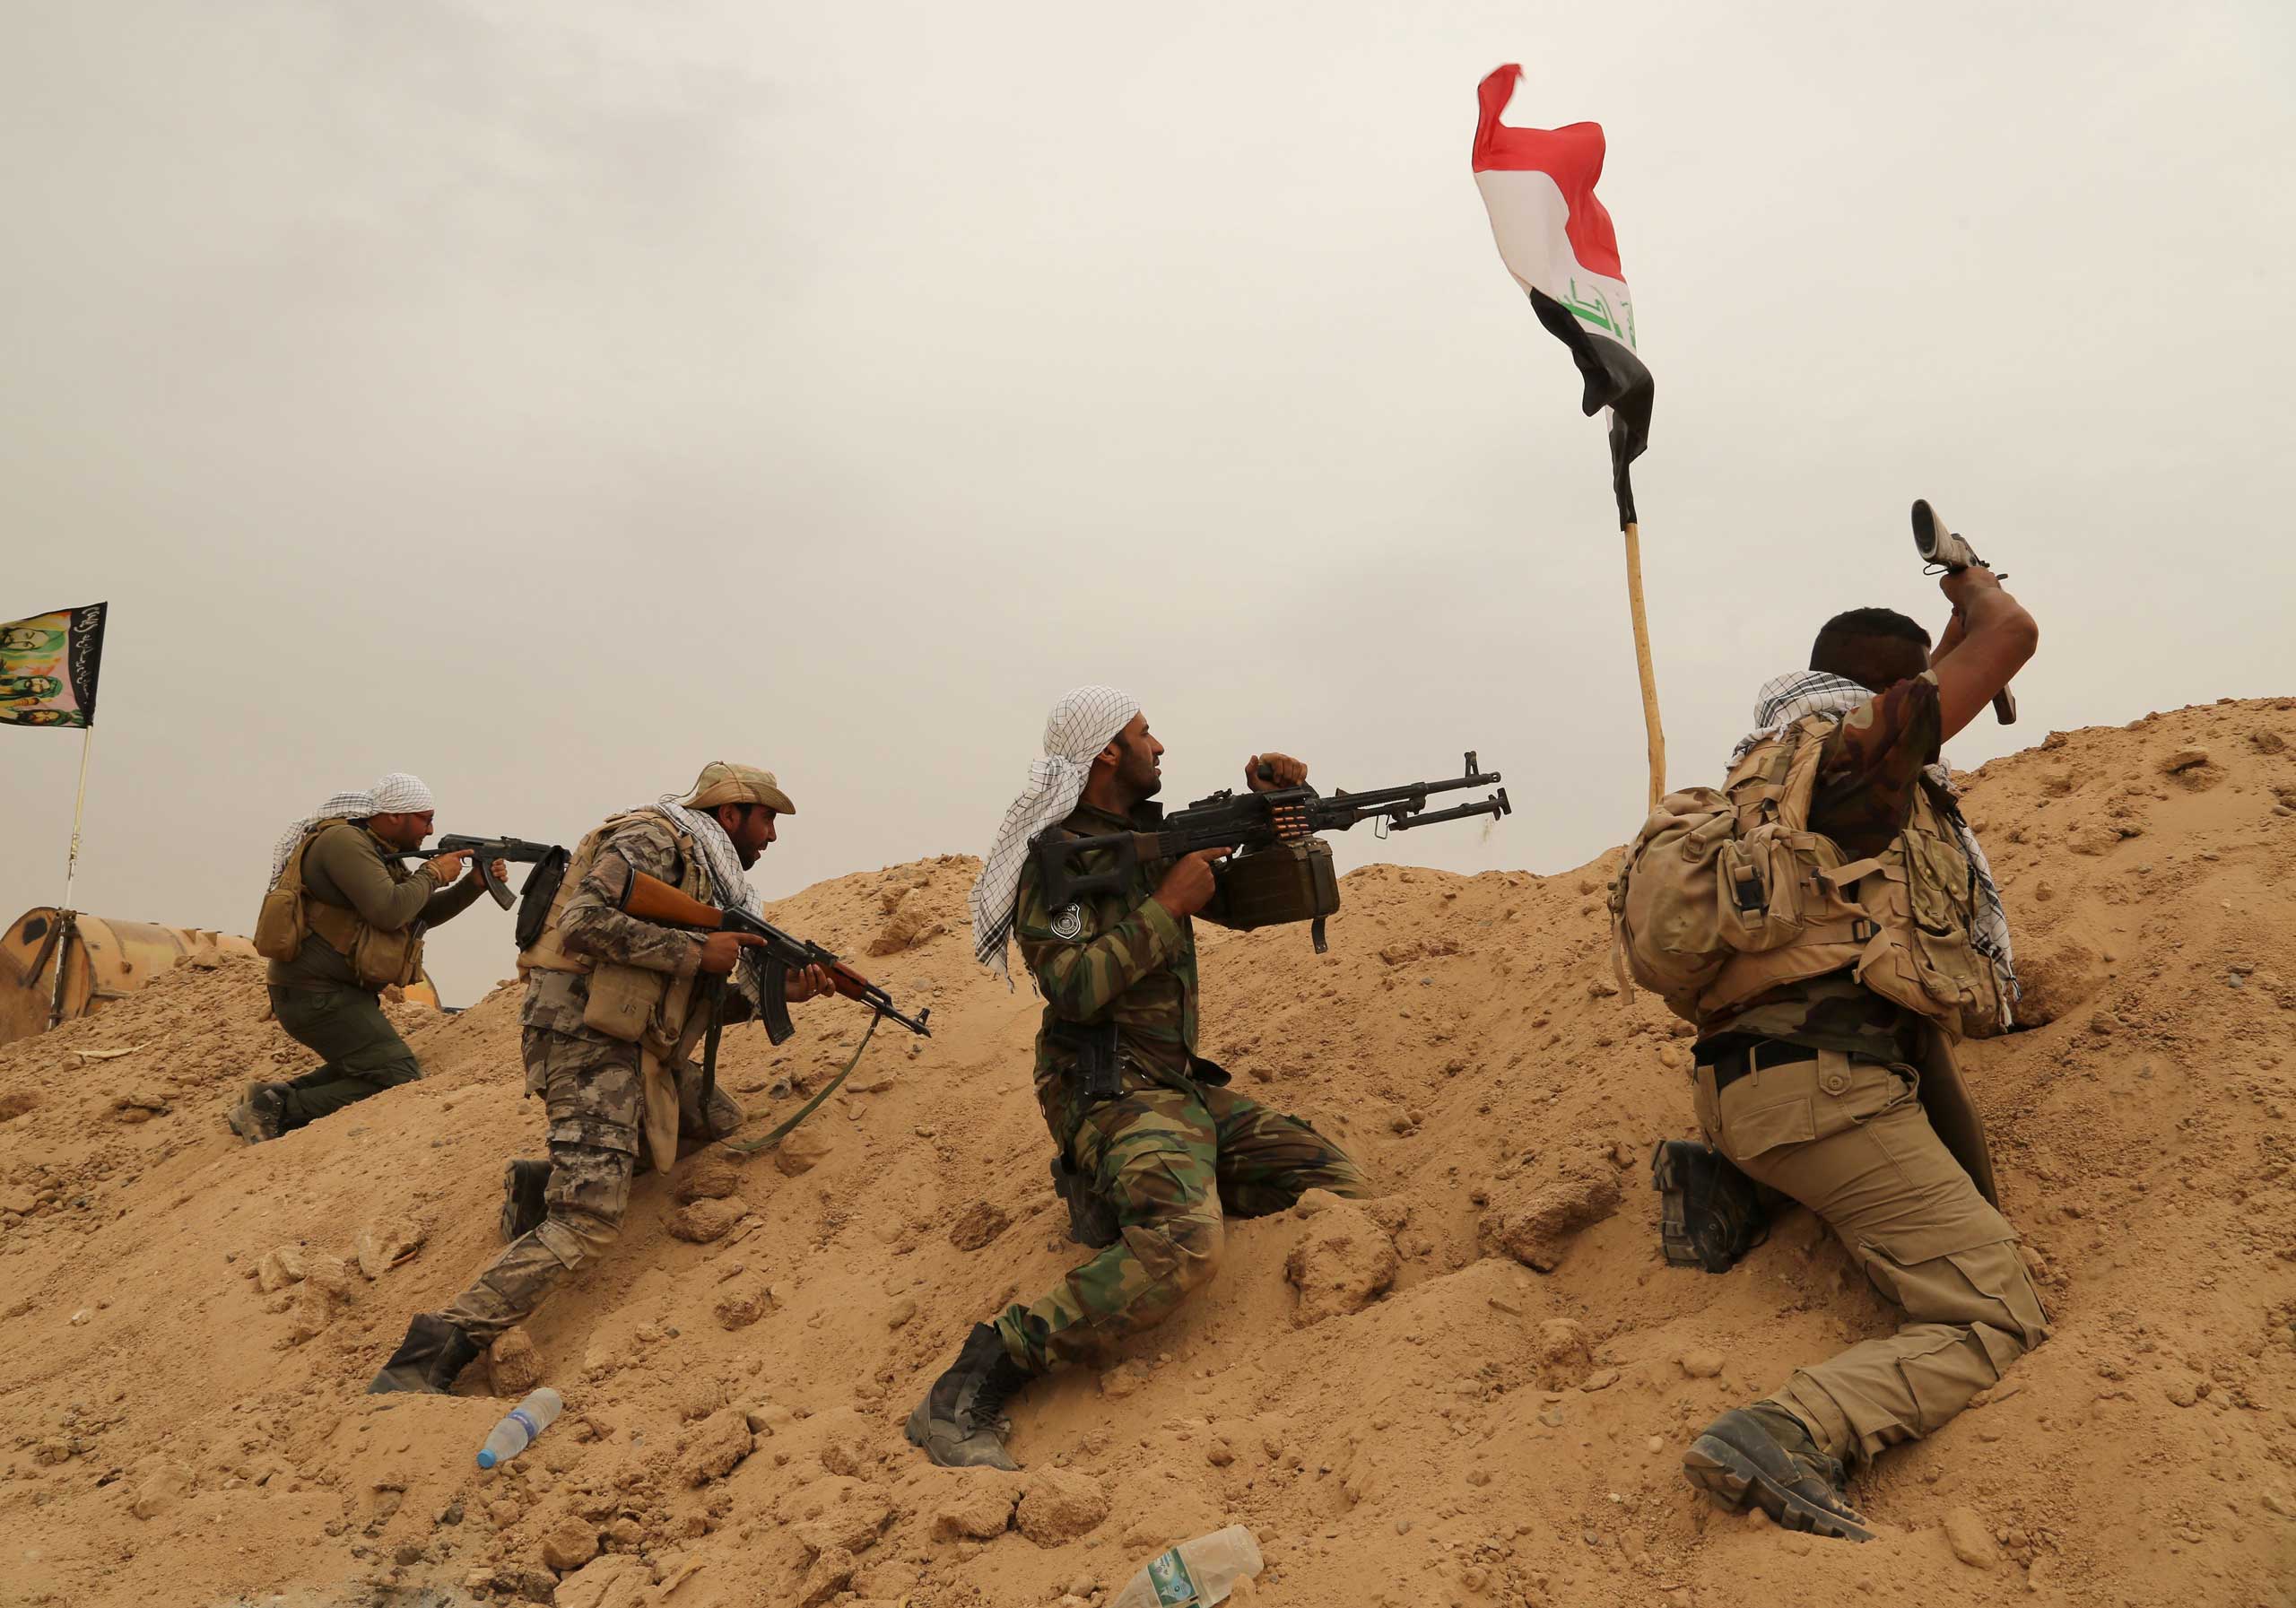 Fighters from Badr Brigades Shiite militia clash with Islamic State group militants at the front line on the outskirts of Fallujah, Anbar province, Iraq on June 1, 2015. (Hadi Mizban—AP)